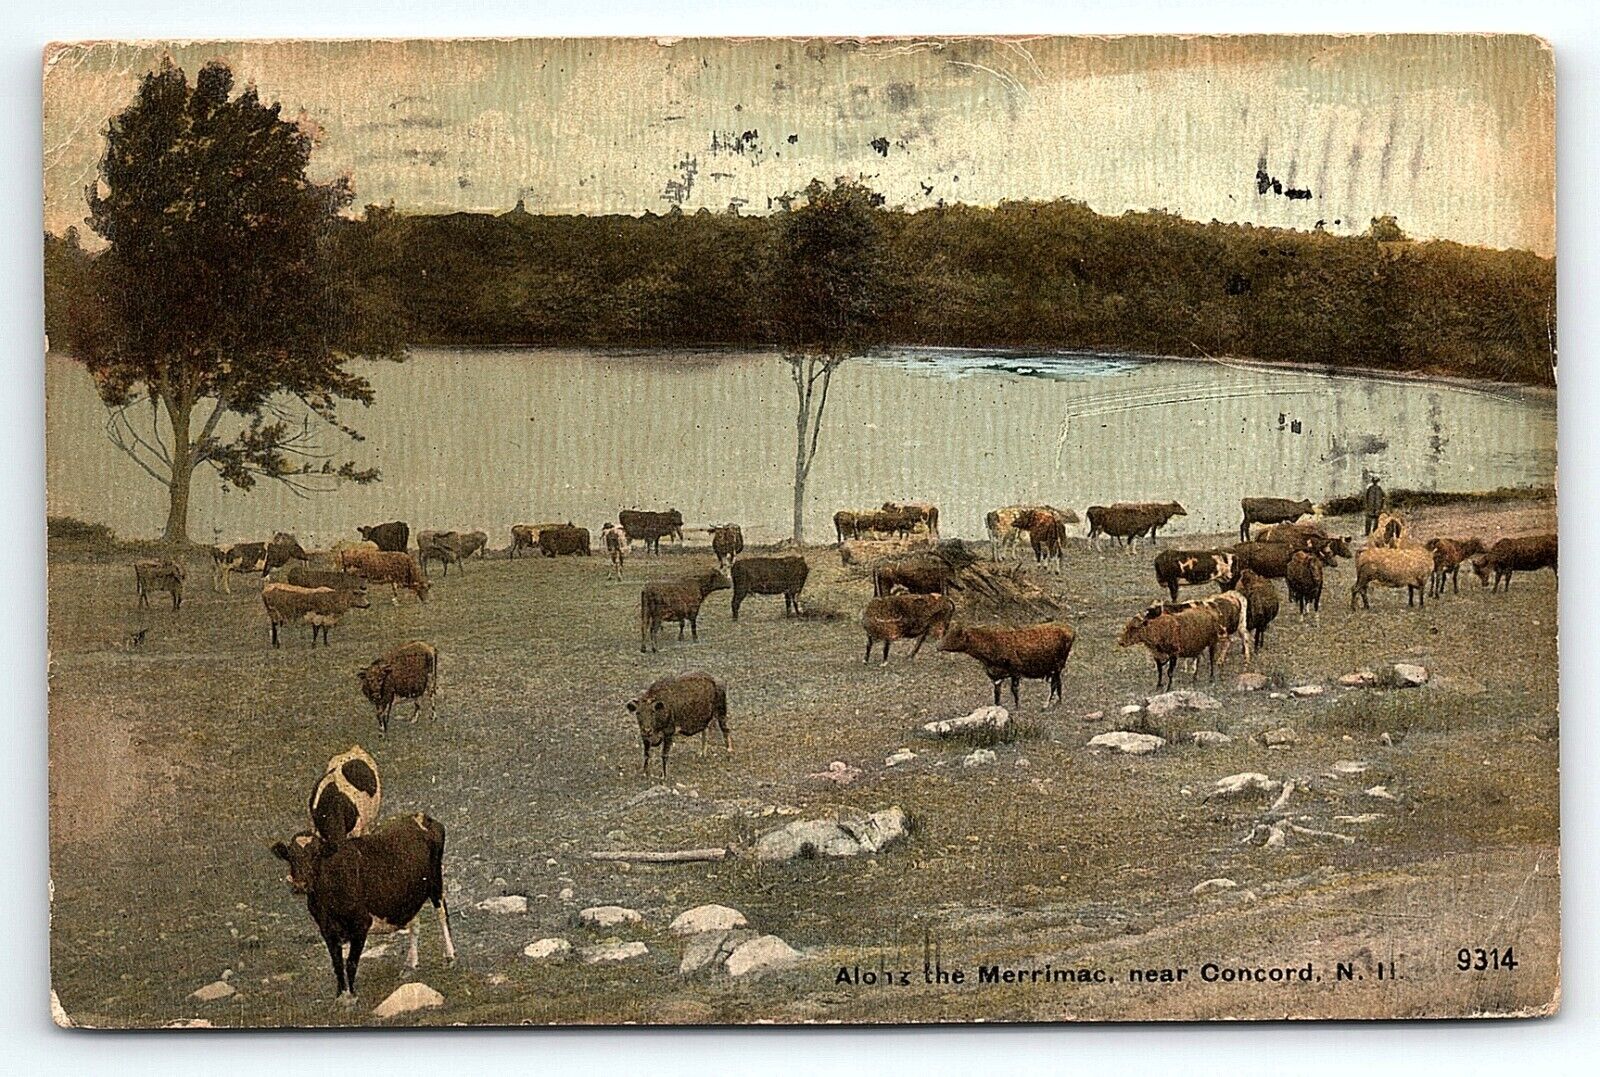 1911 CONCORD NEW HAMPSHIRE ALONG THE MERRIMAC CATTLE GRAZING POSTCARD P3239